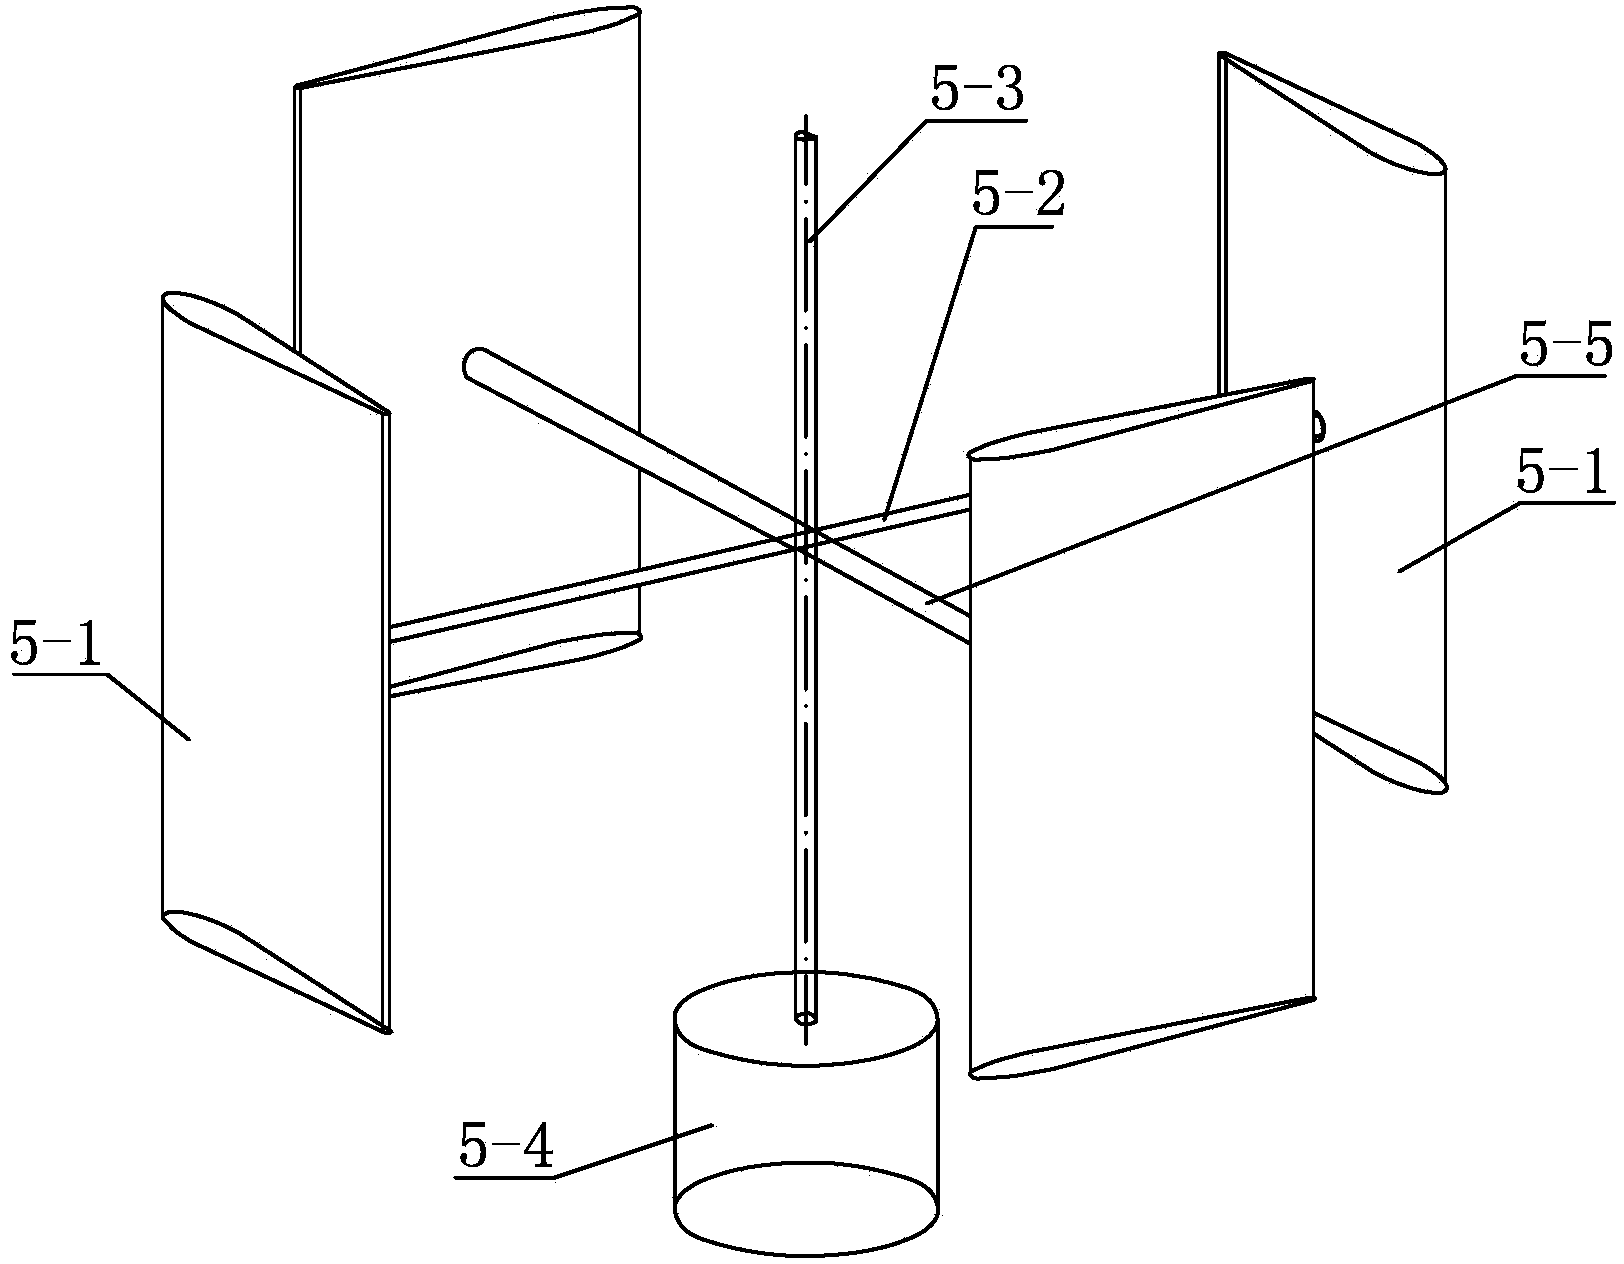 Tower type surrounding distributed wind-solar complementary power generation device